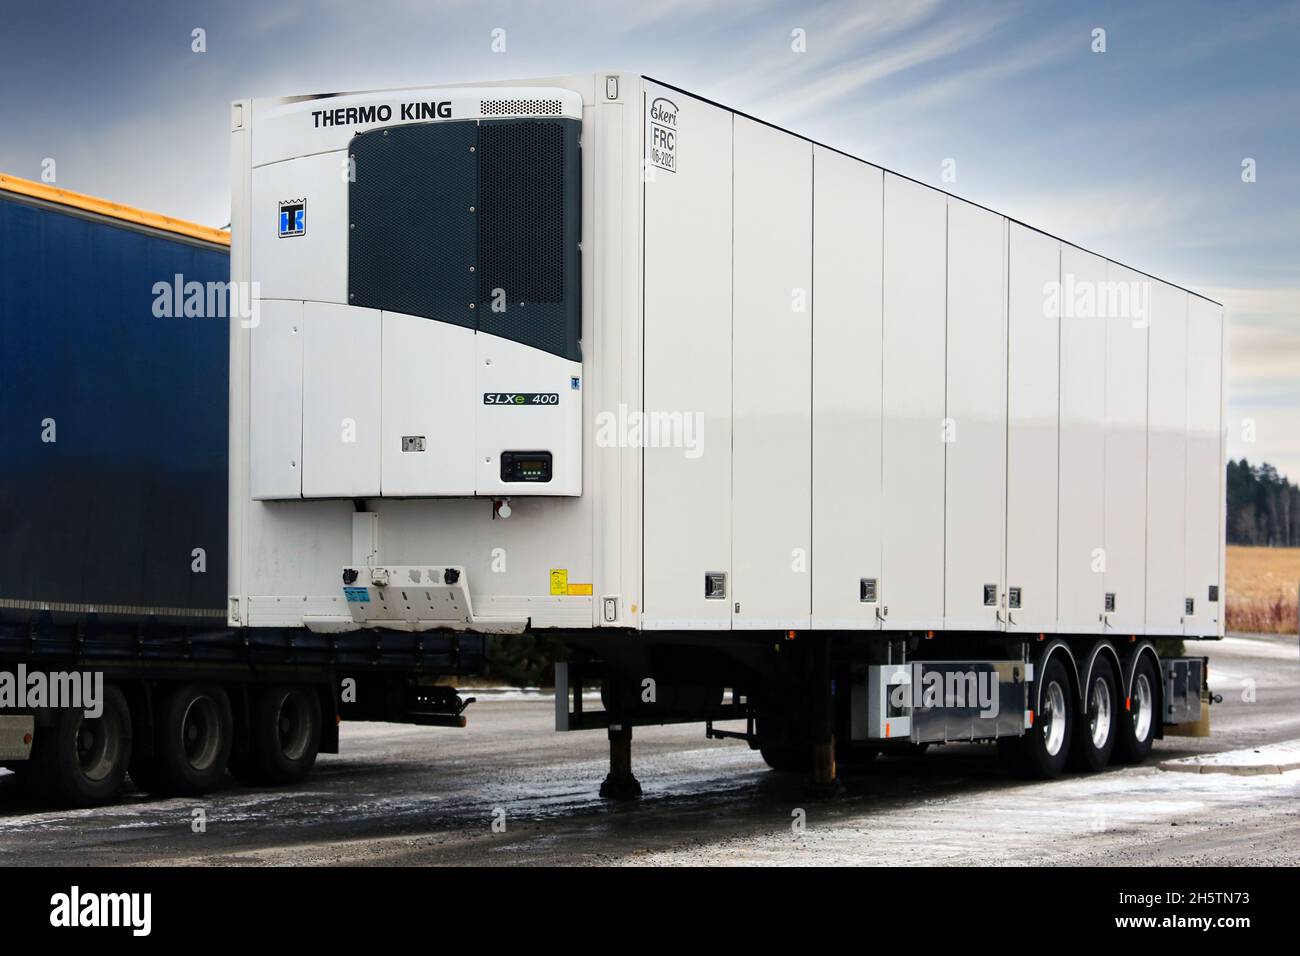 Detached refrigerated semi trailer manufactured by Ekeri Oy with Thermo King SLXE 400 refrigeration unit at truck stop. Salo, Finland. Feb 11, 2017. Stock Photo